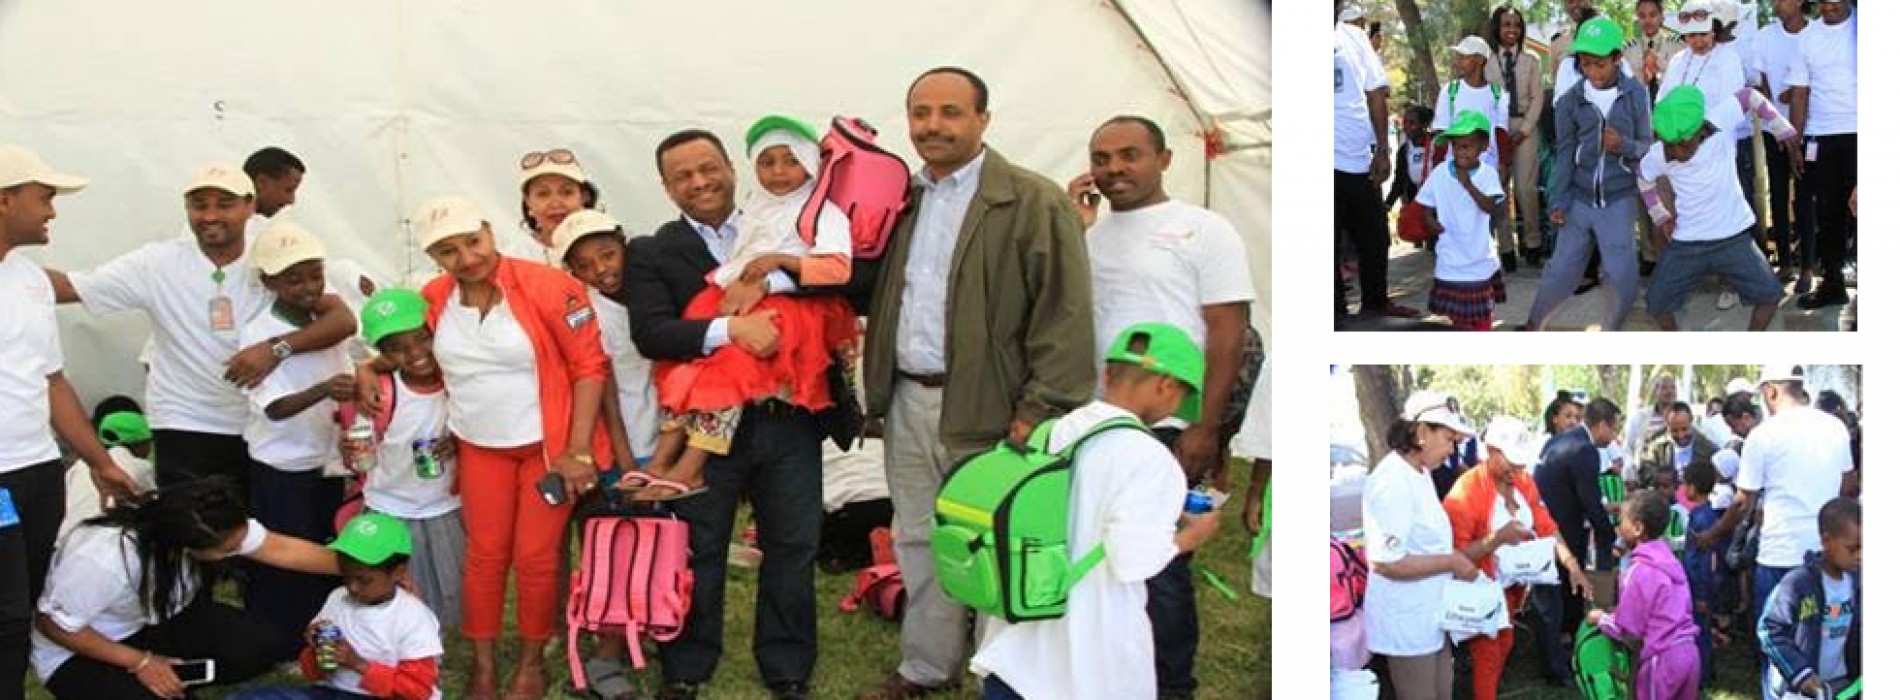 Ethiopian marks annual Christmas party day with orphans